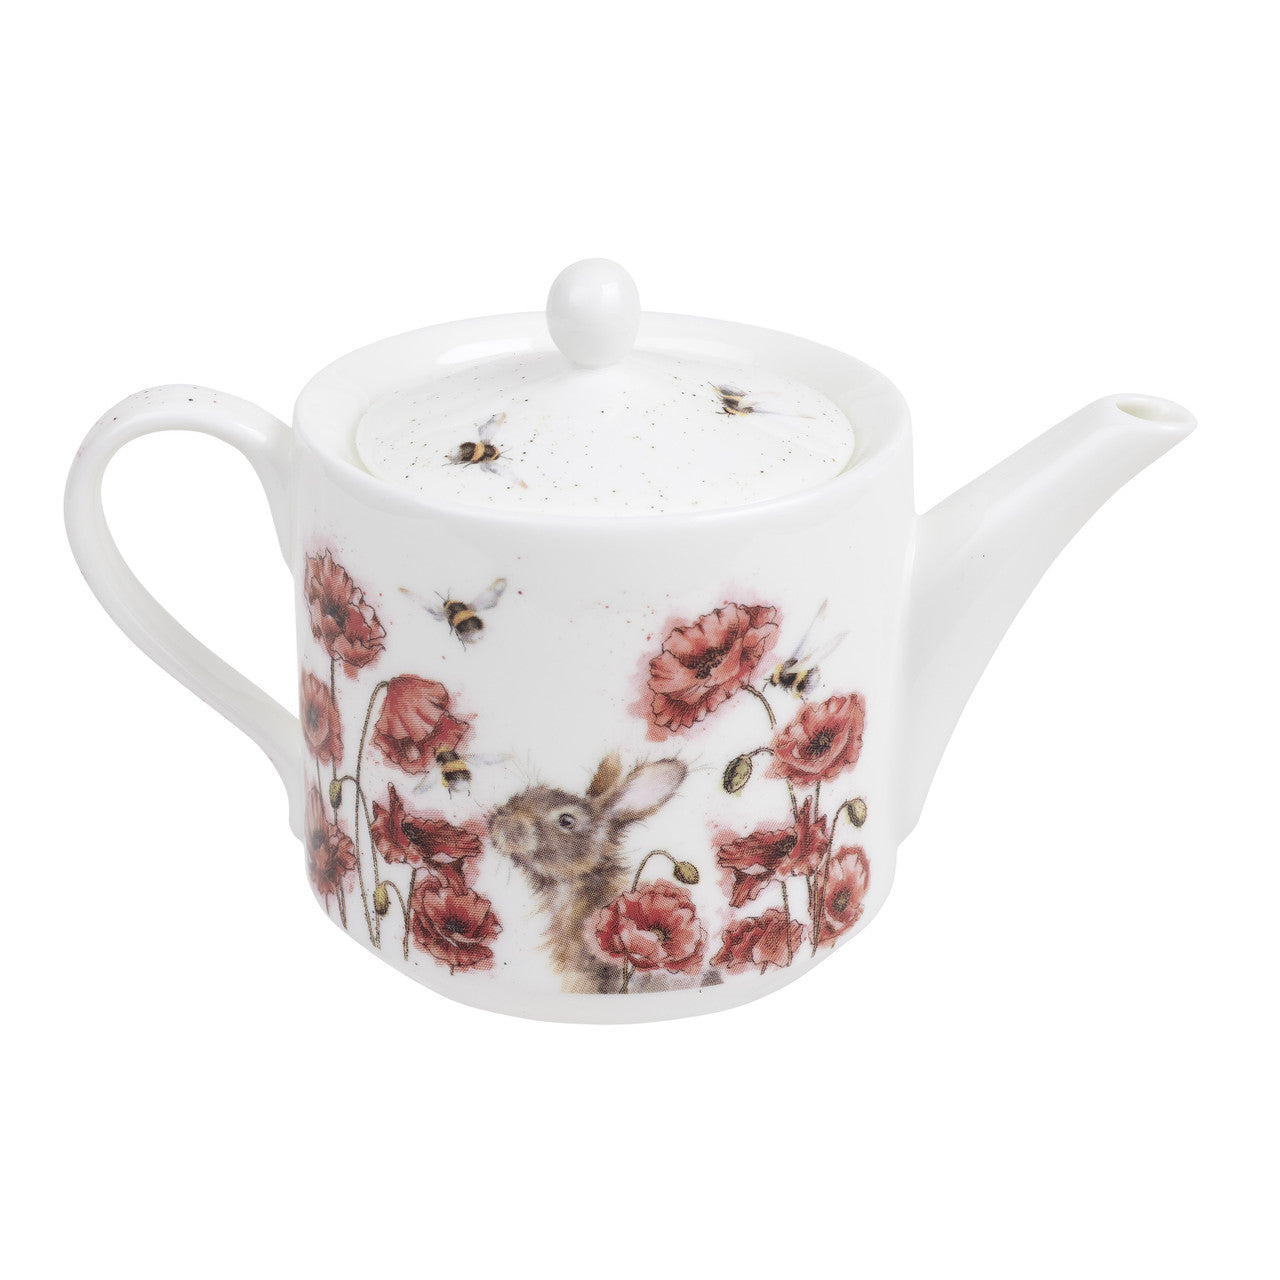 'Let it Bee' Fine Bone China Teapot in a Wrendale Design by Royal Worcester.